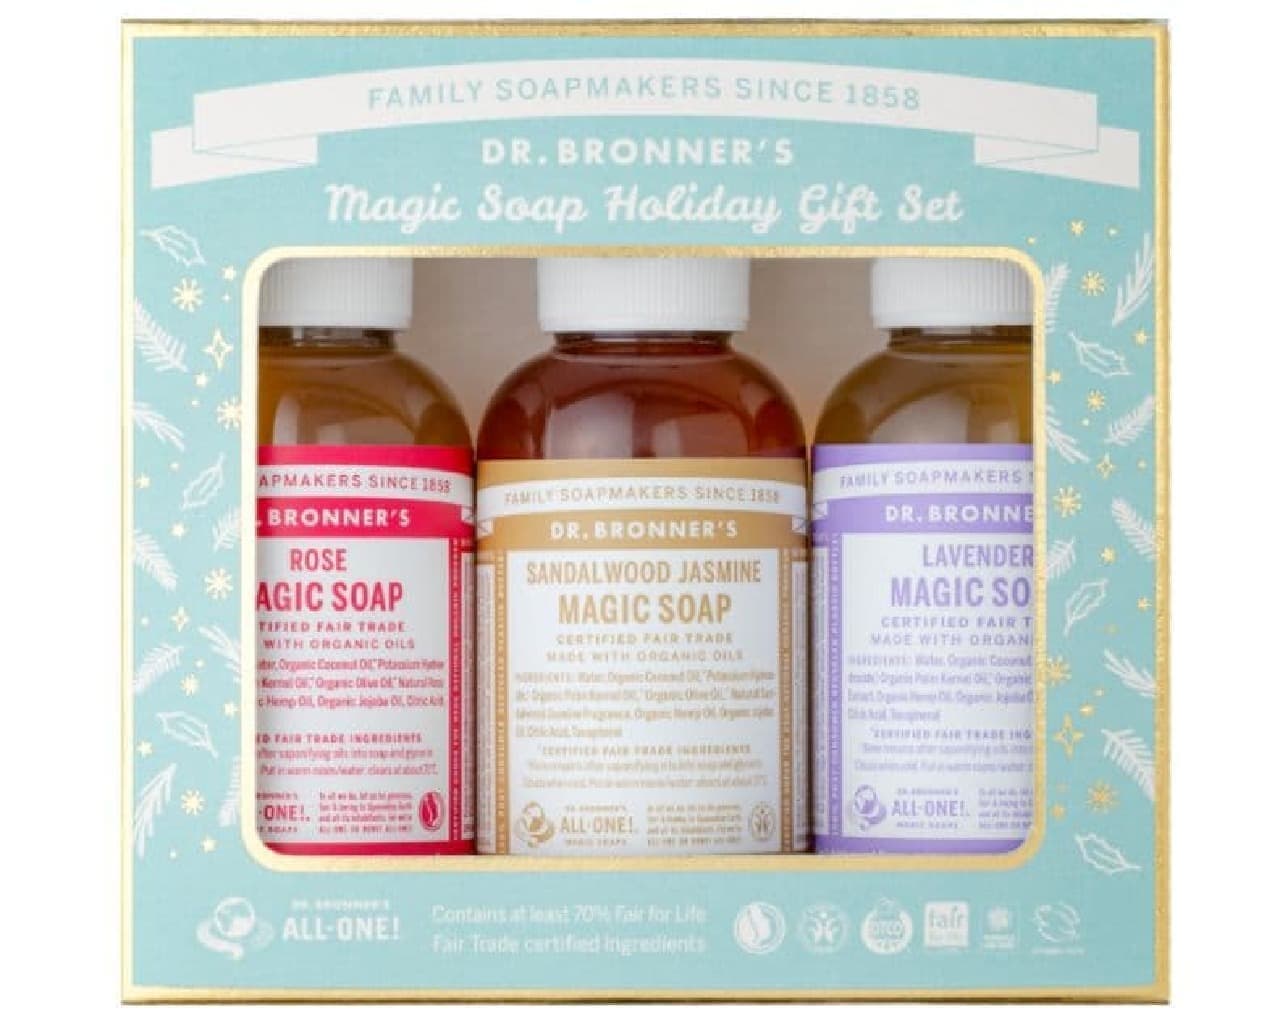 Dr. Bronner's "Magic Soap Holiday Gift"